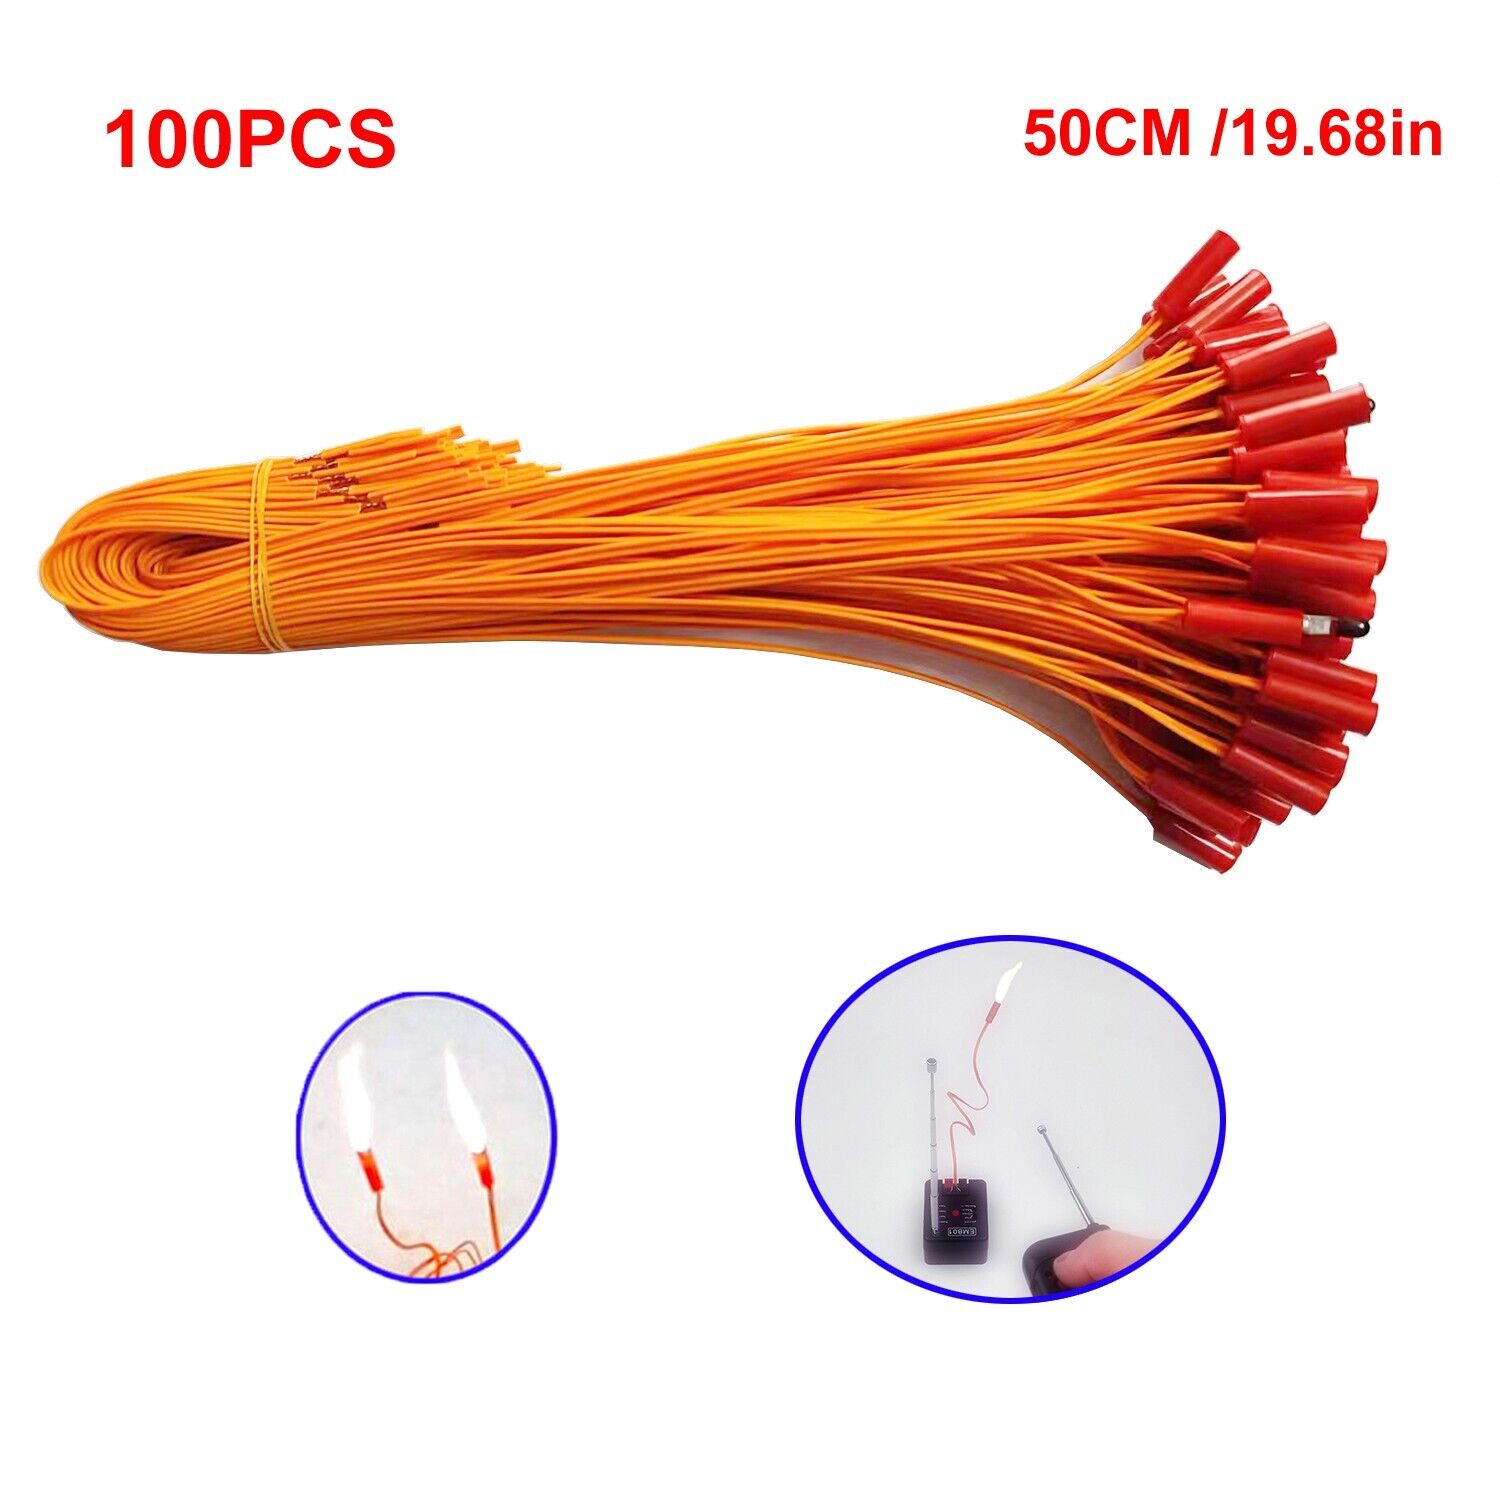 100pcs 50CM Electric Connecting Wire for Fireworks Firing System Igniter Match